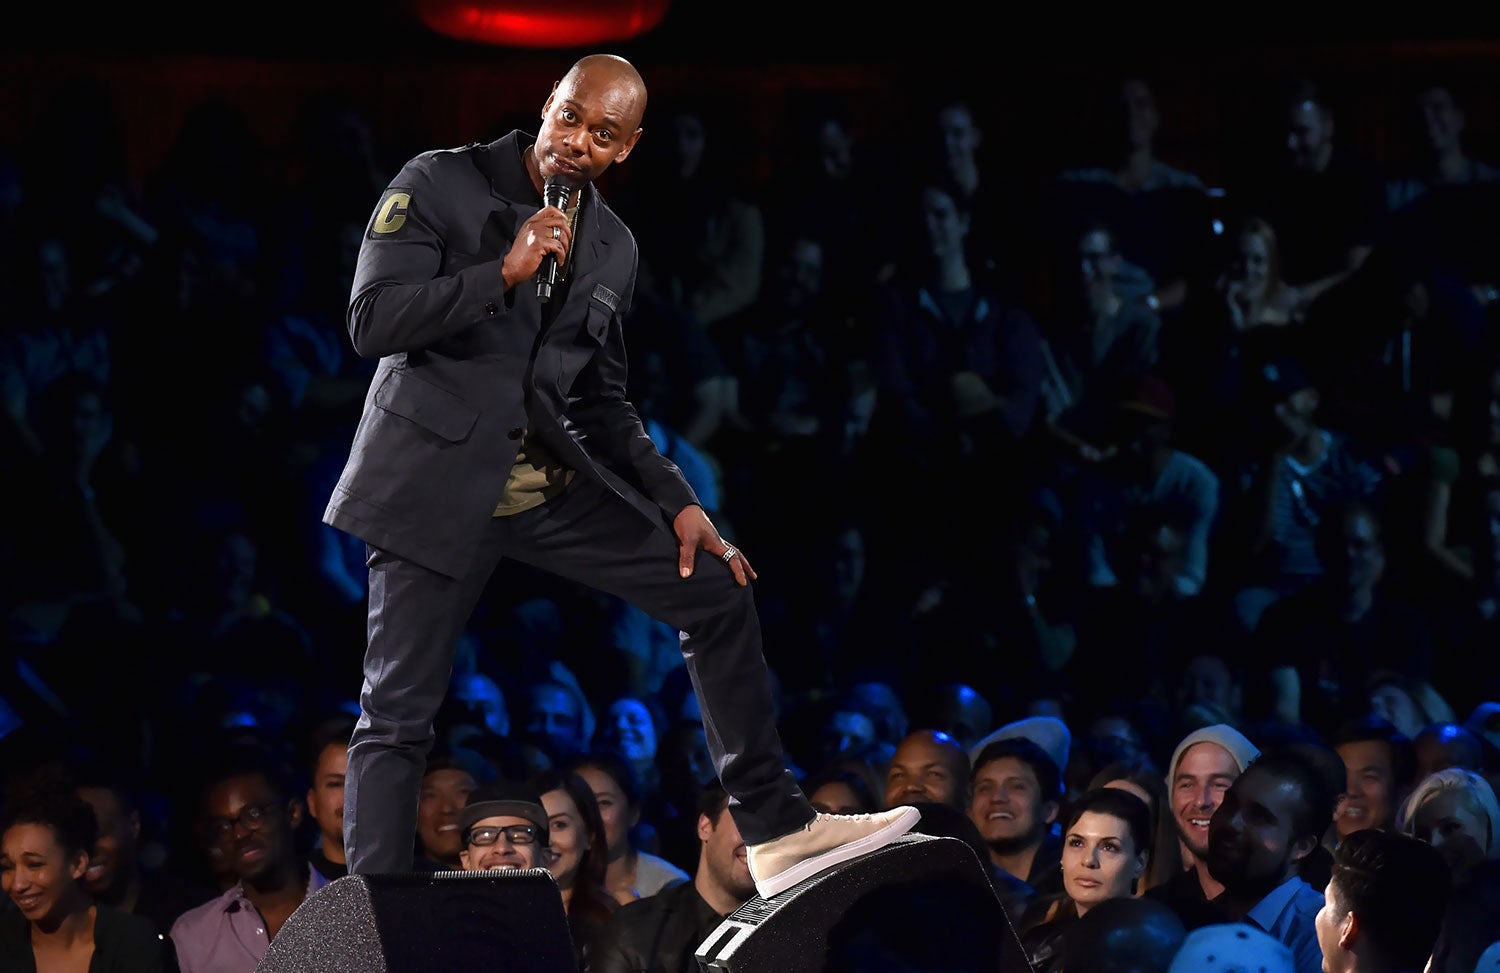 Who Needs Sleep? Fans Stayed Up All Night Waiting For Dave Chappelle's Netflix Special